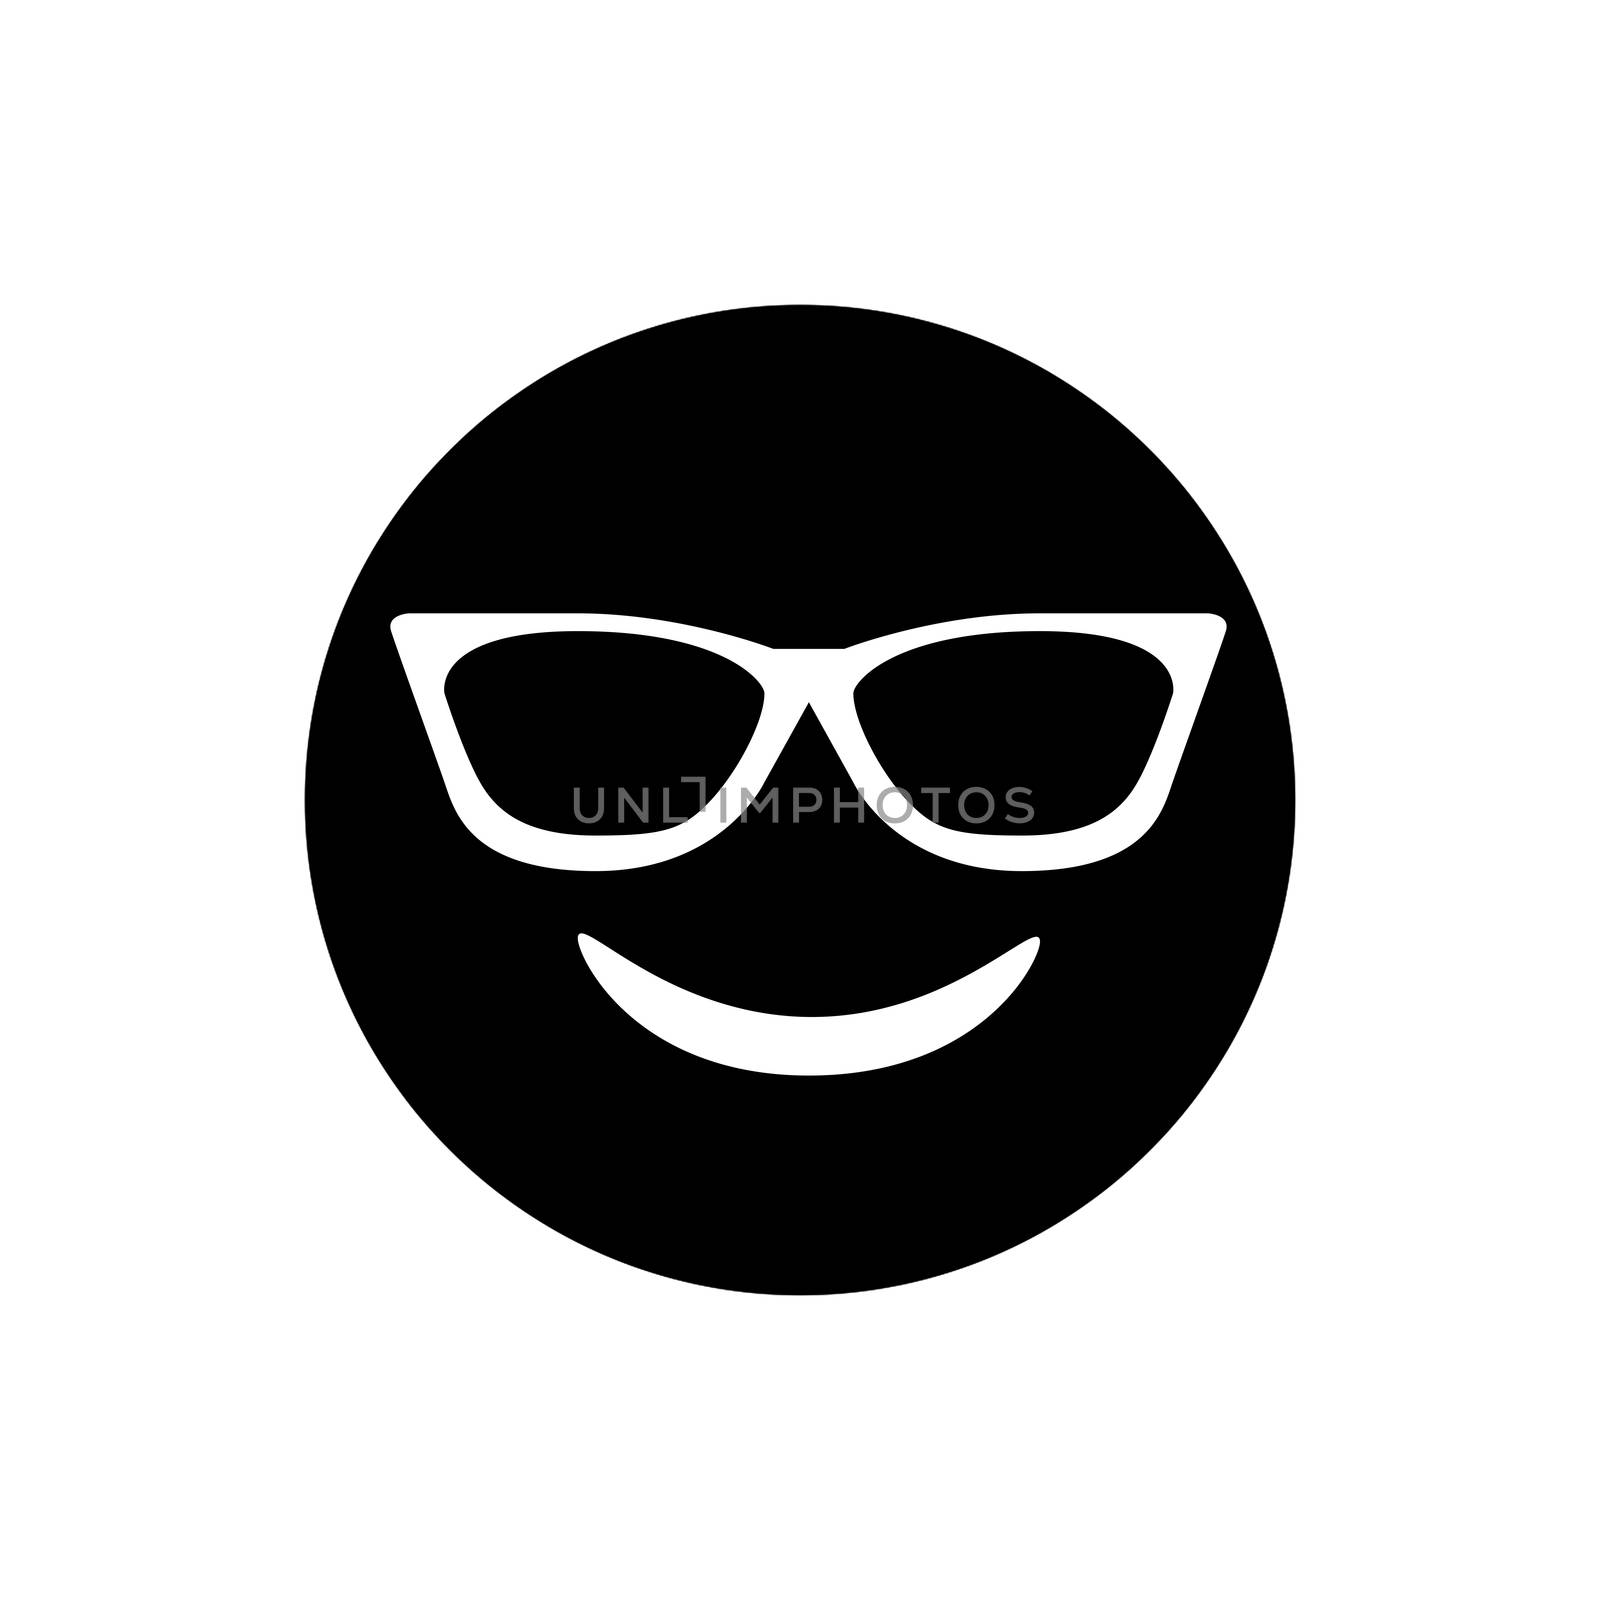 Black smiley face with sunglasses icon by cougarsan